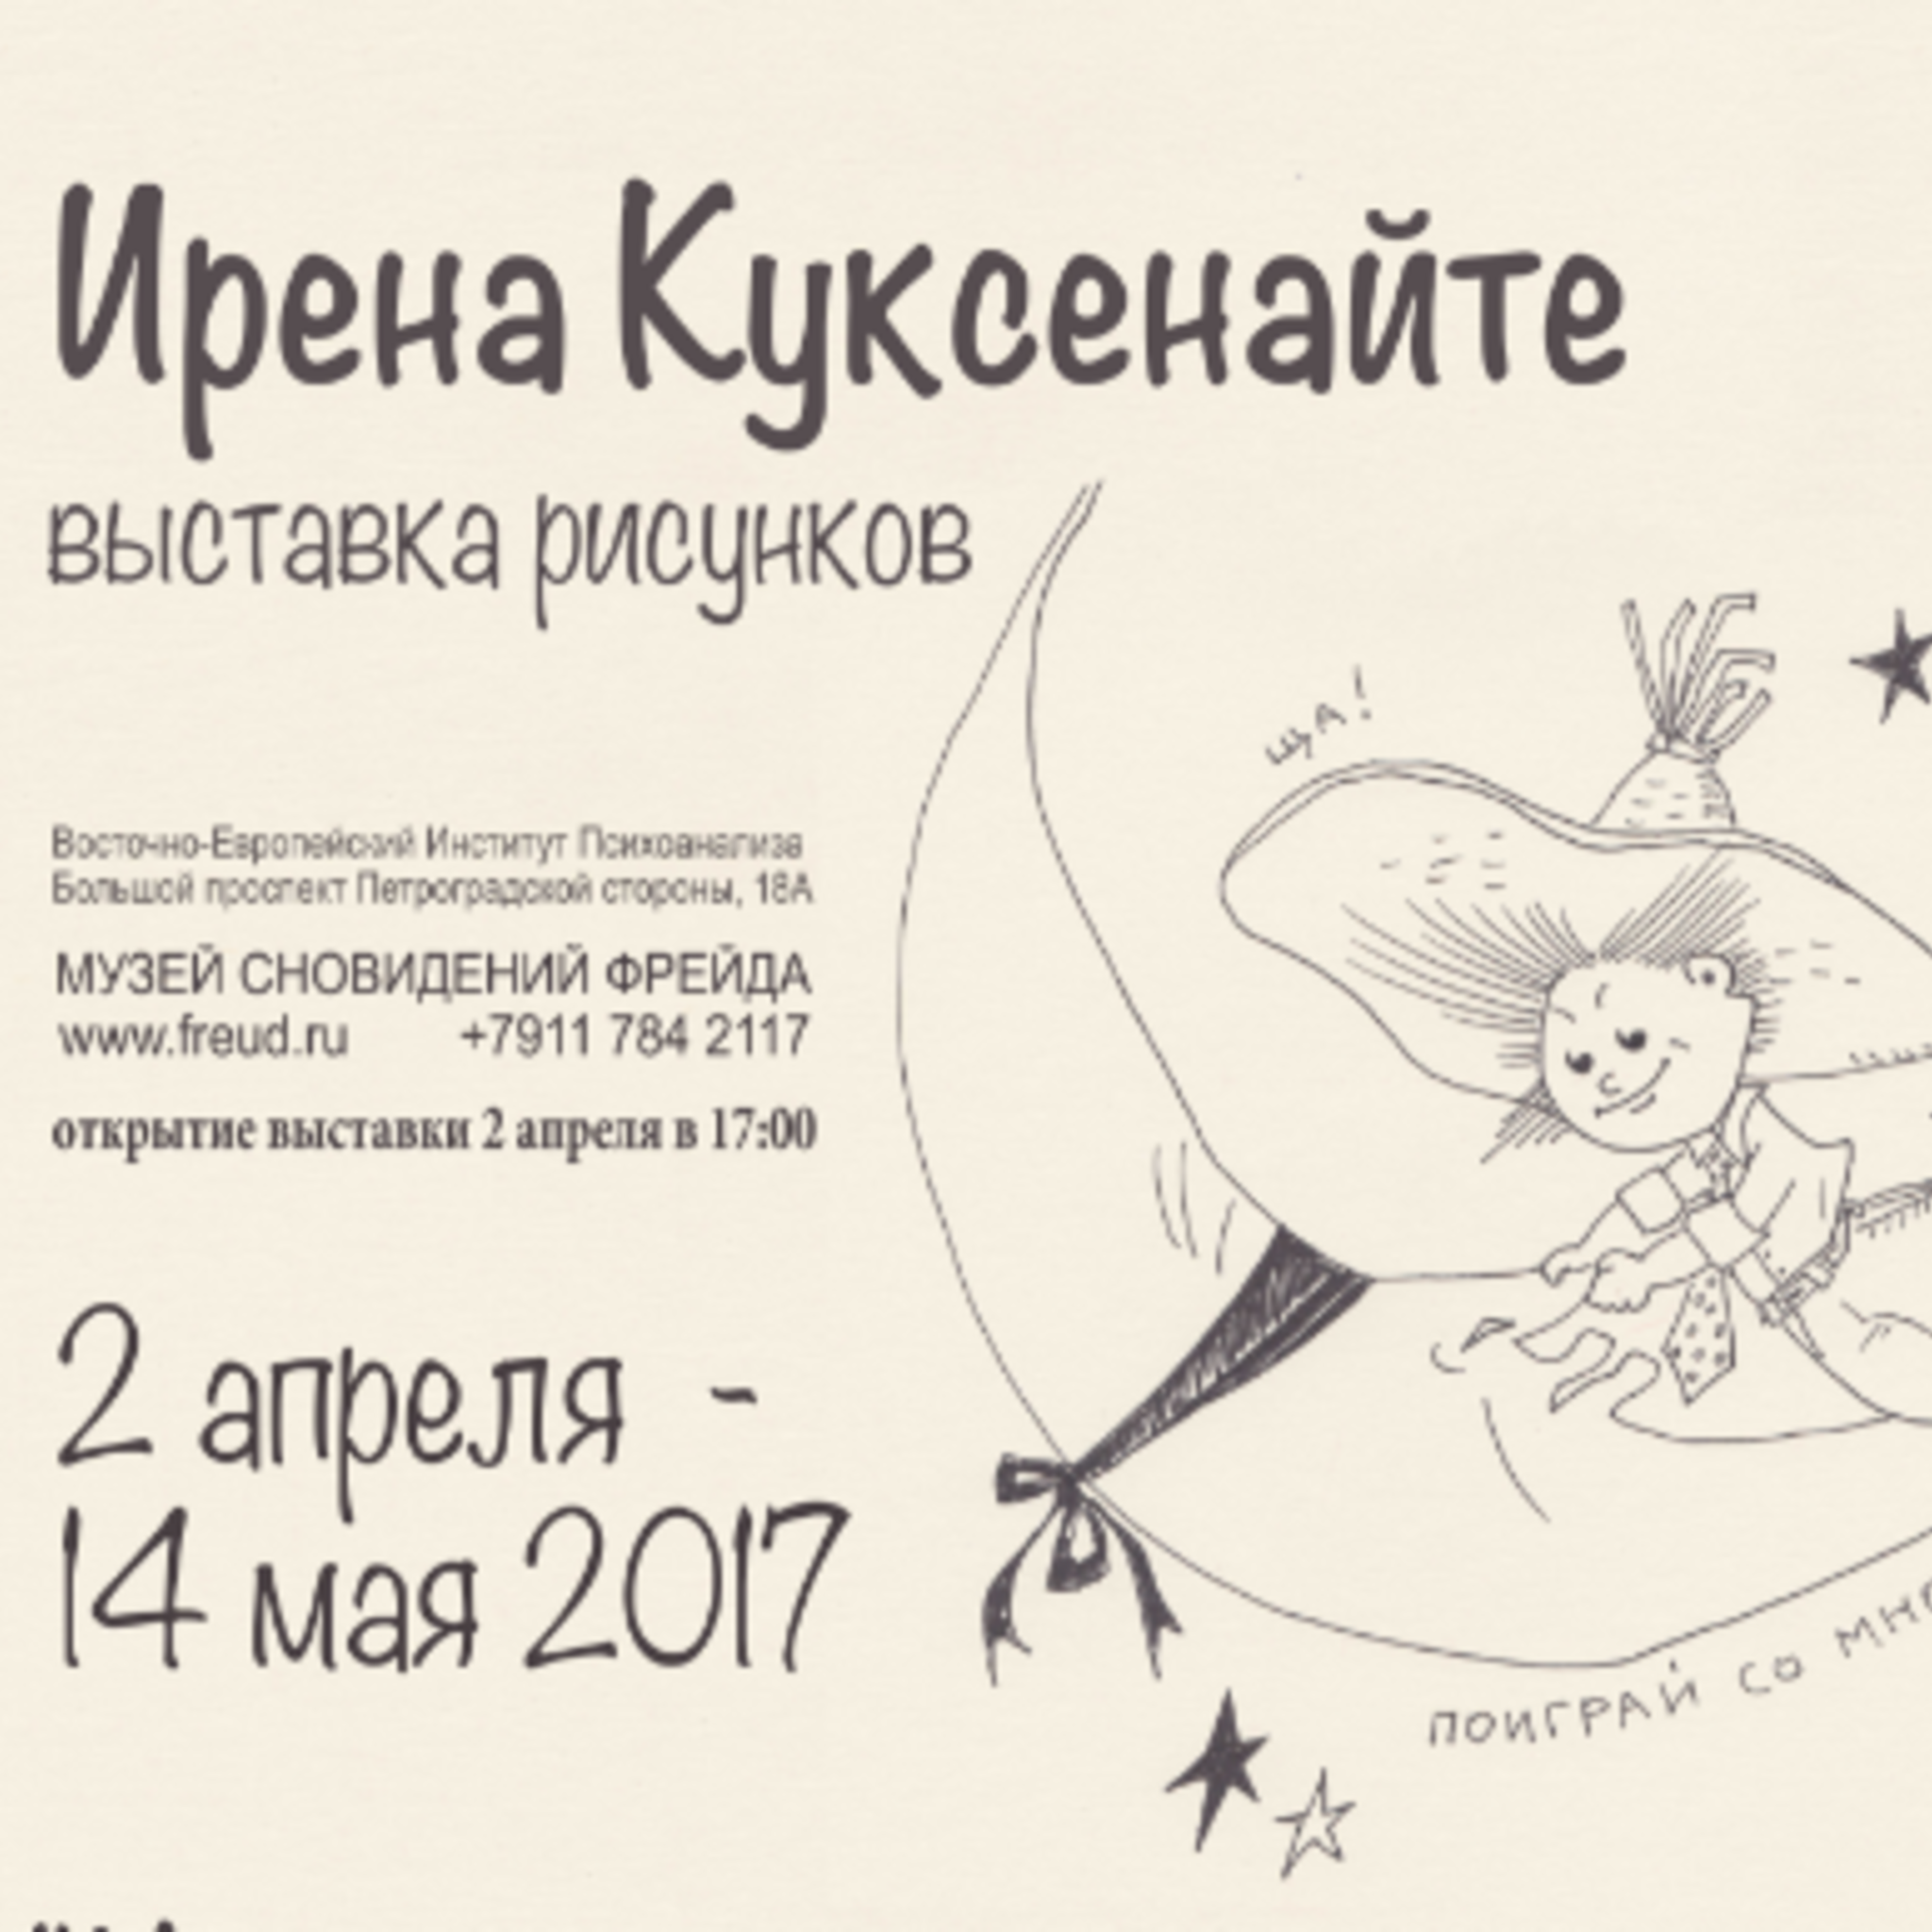 Exhibition of drawings by Irene Kuksenate